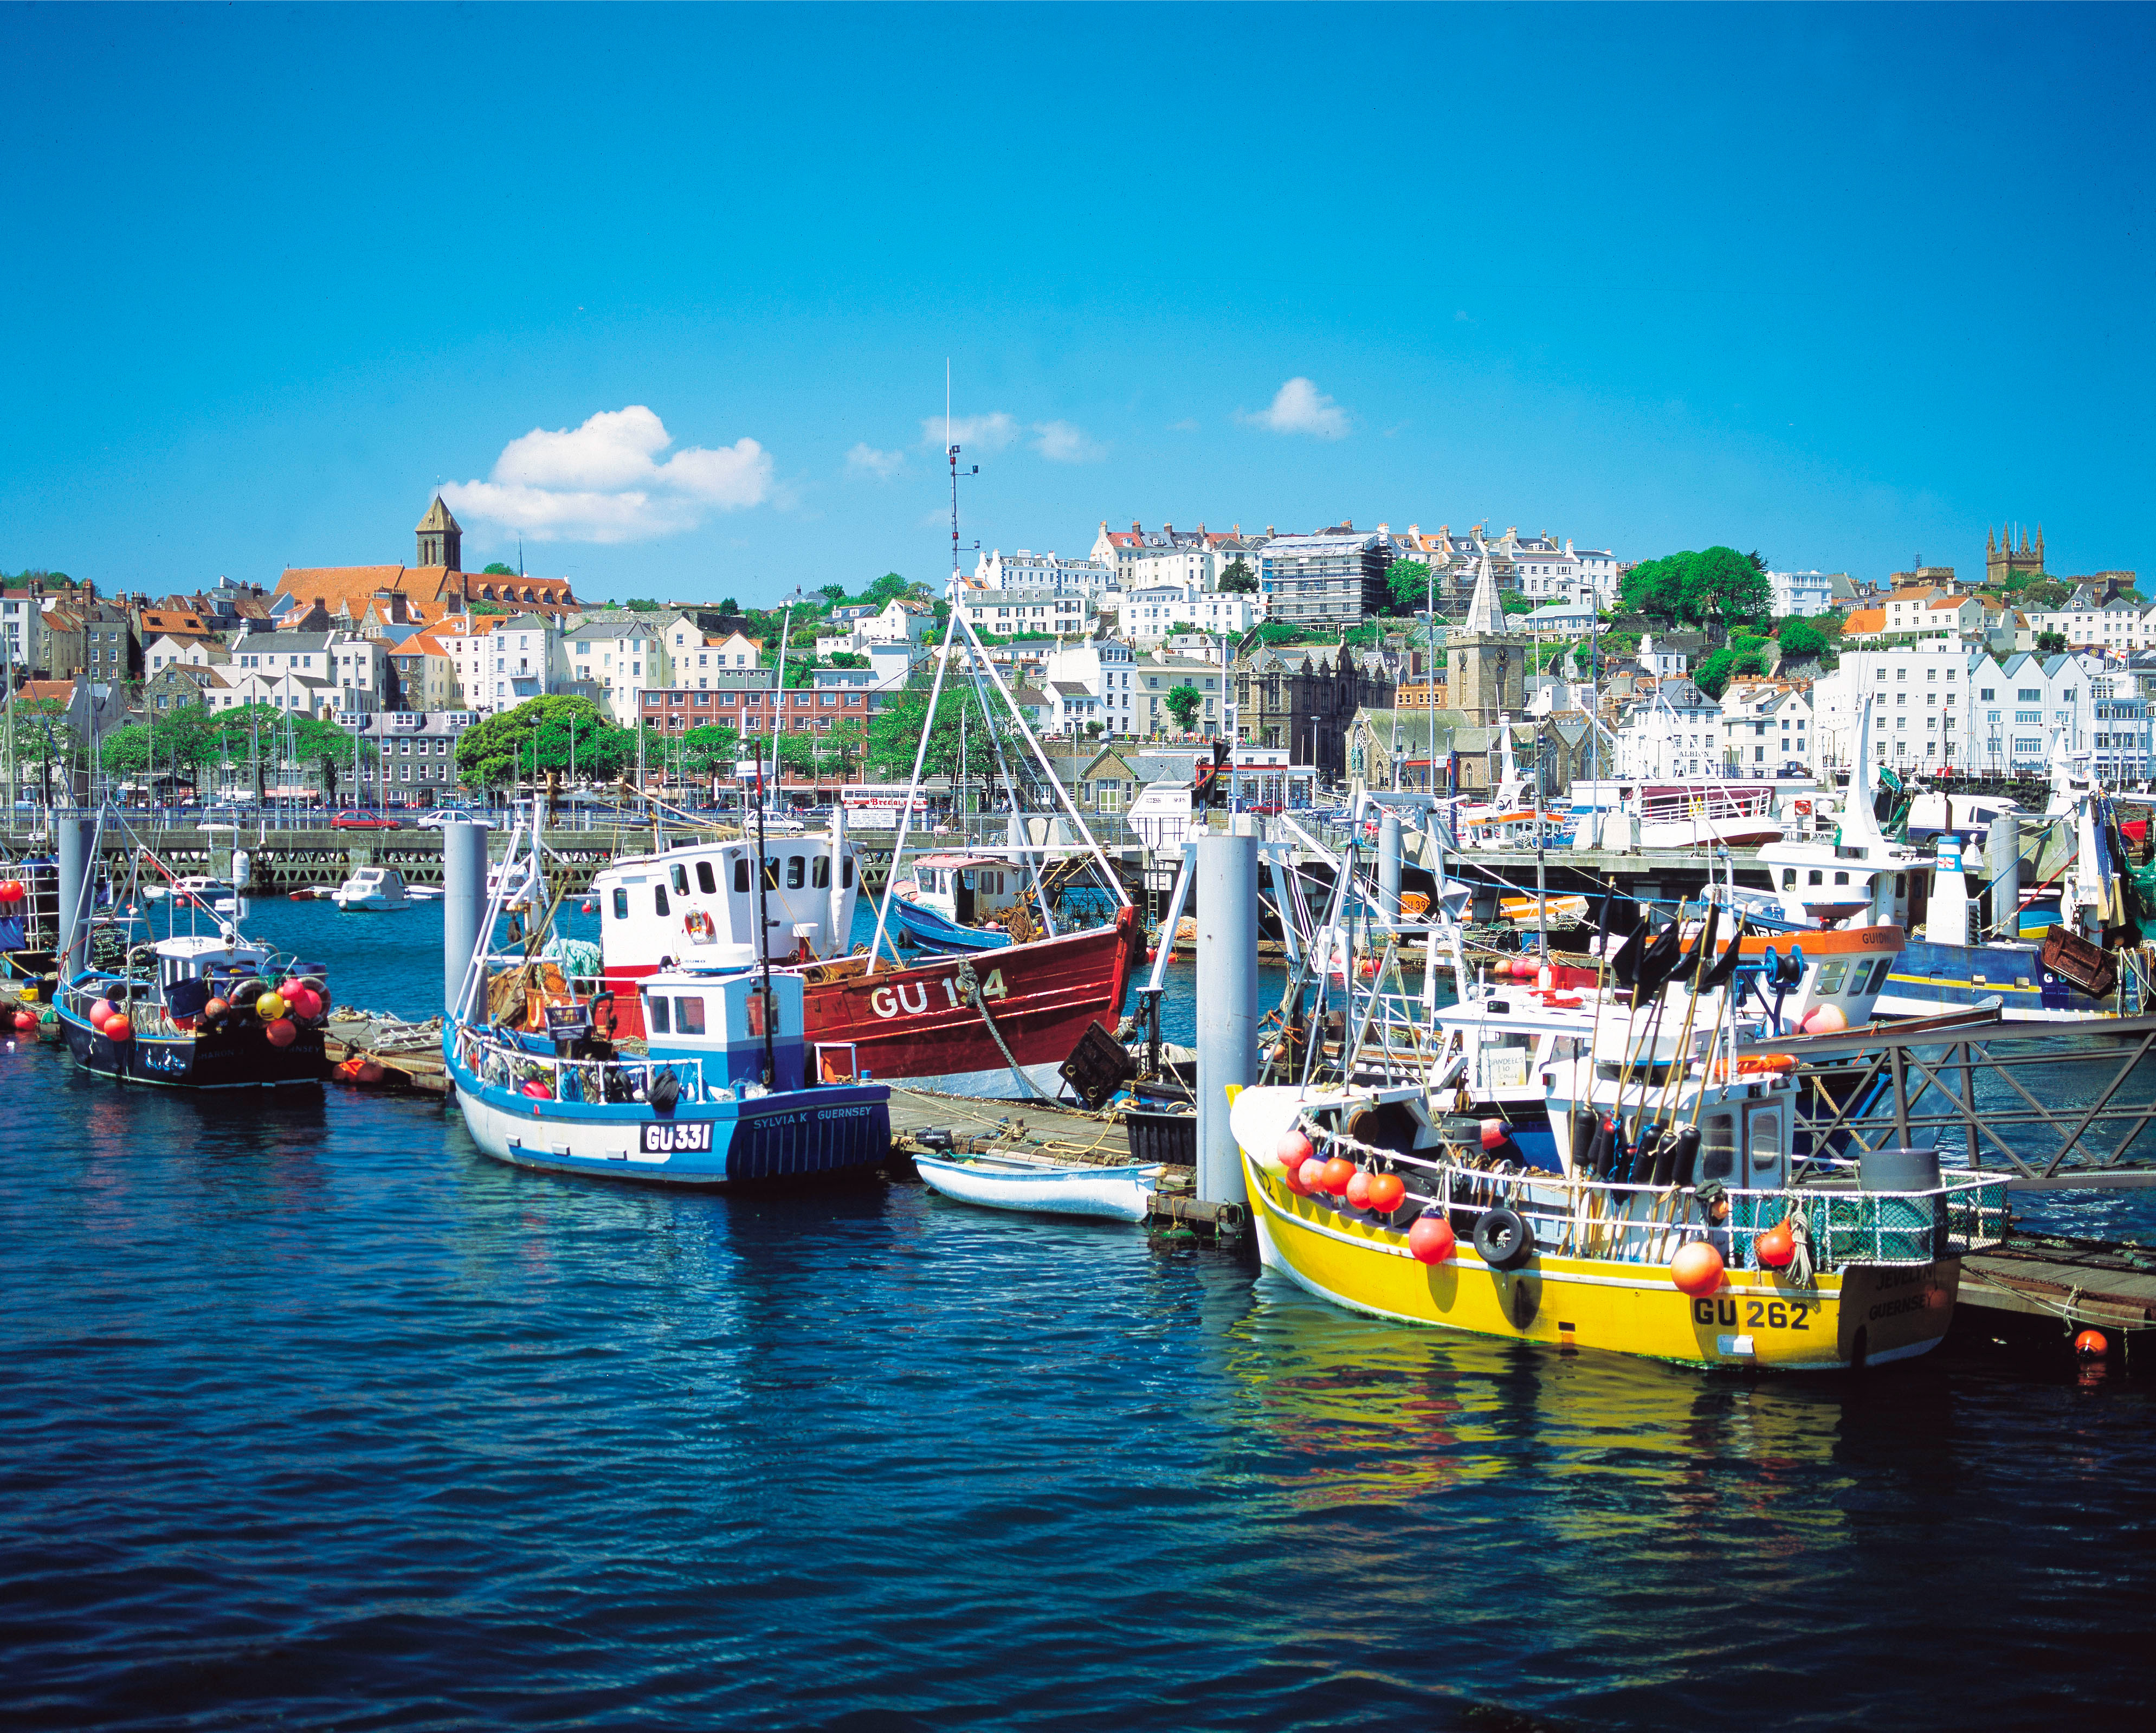 Day Trips to Guernsey, now half price